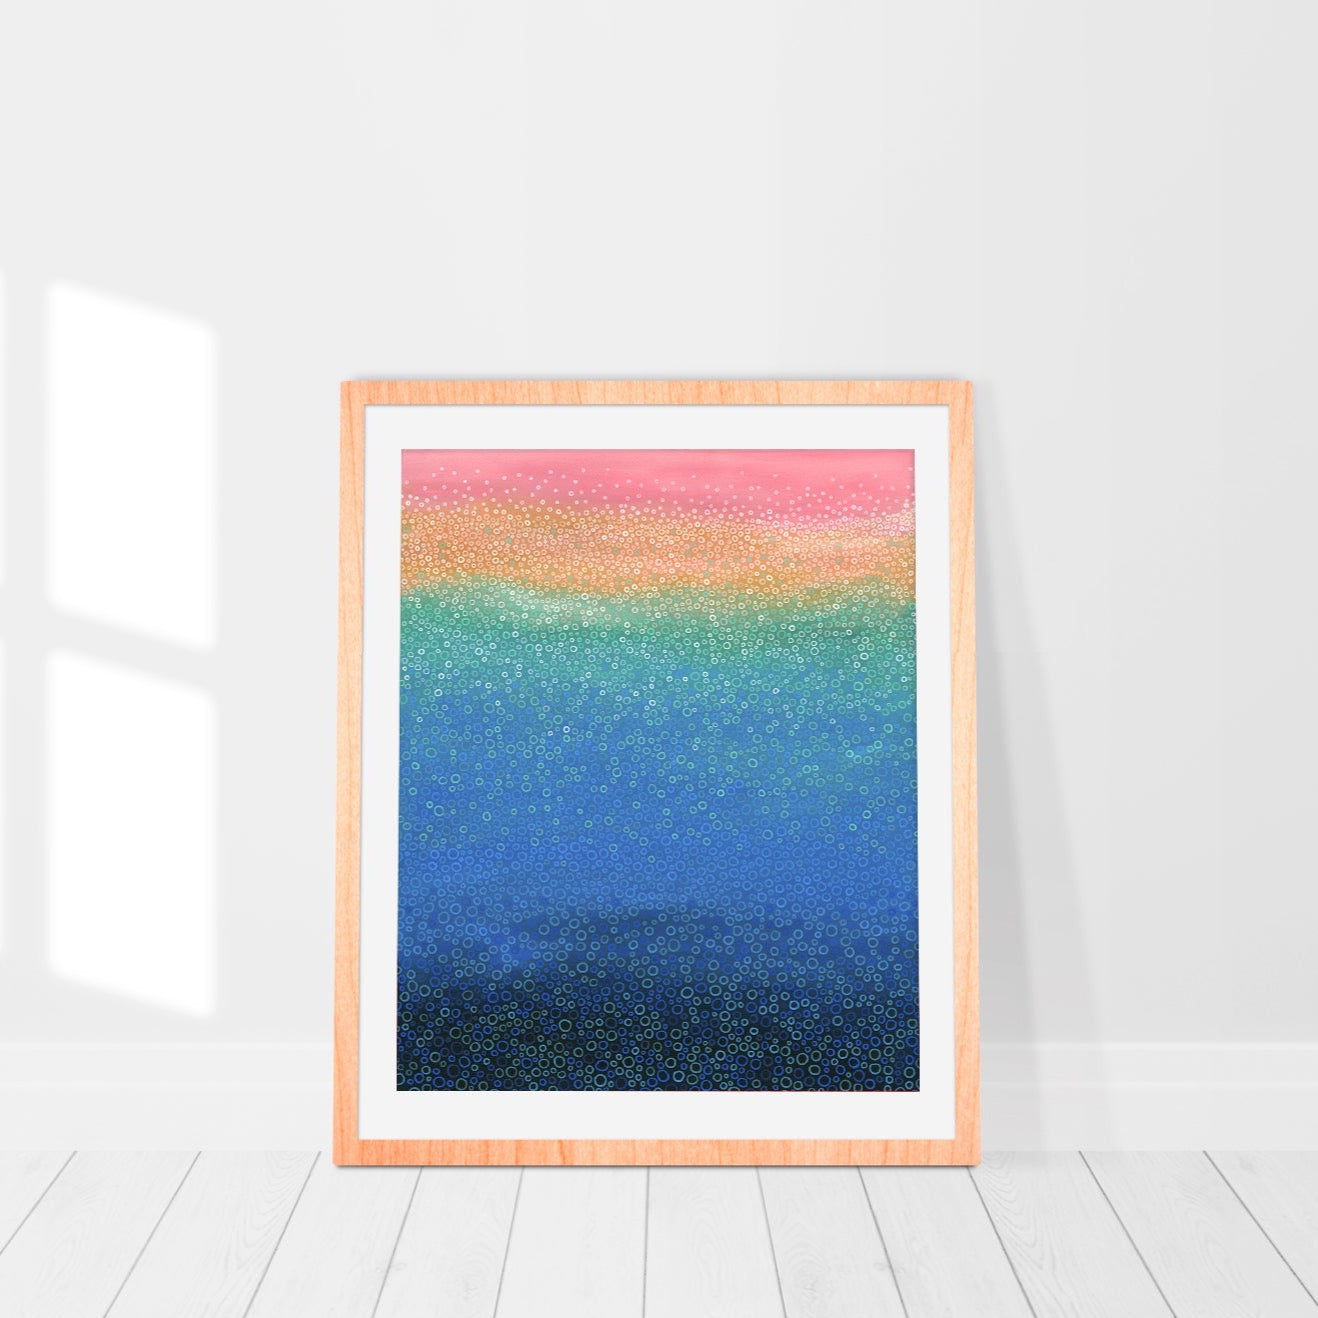 Colourful print in frame withblues, soft pinks and turquoise. Abstract pointillism.